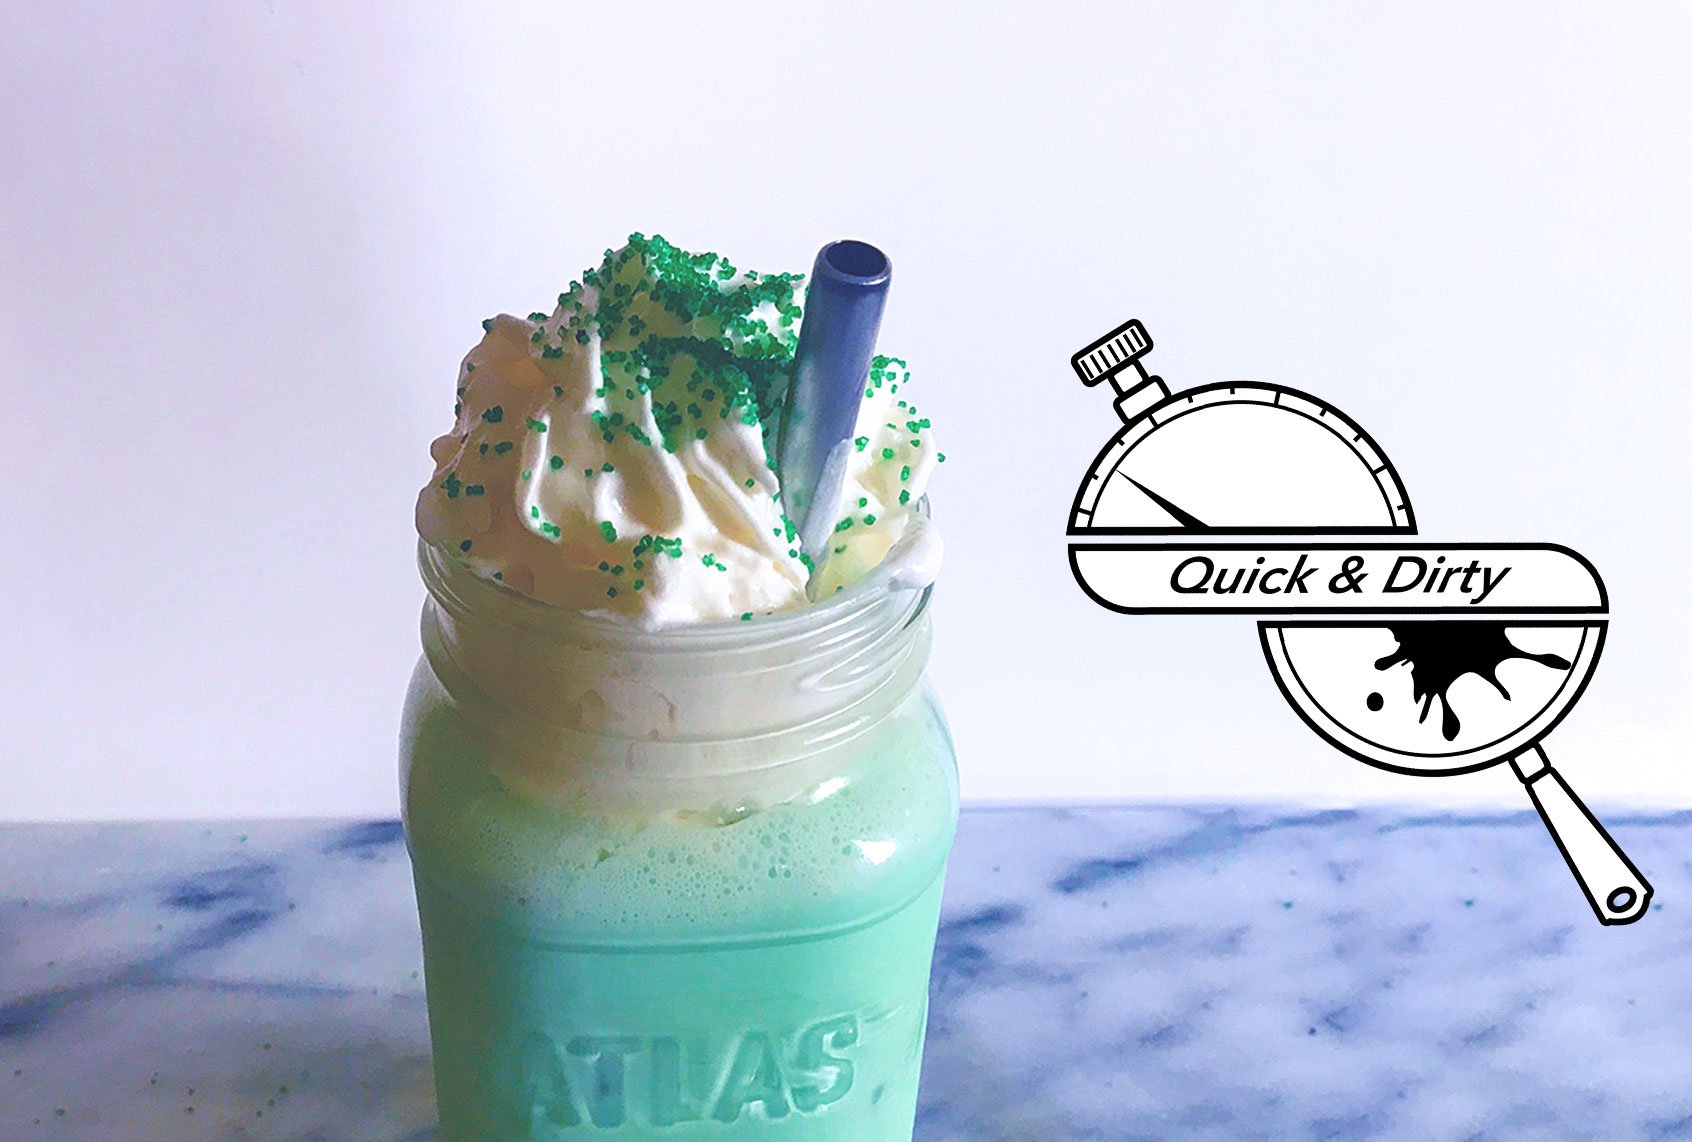 McDonald’s Shamrock Shake is aid for St. Patrick’s Day, but our easy homemade recipe has booze